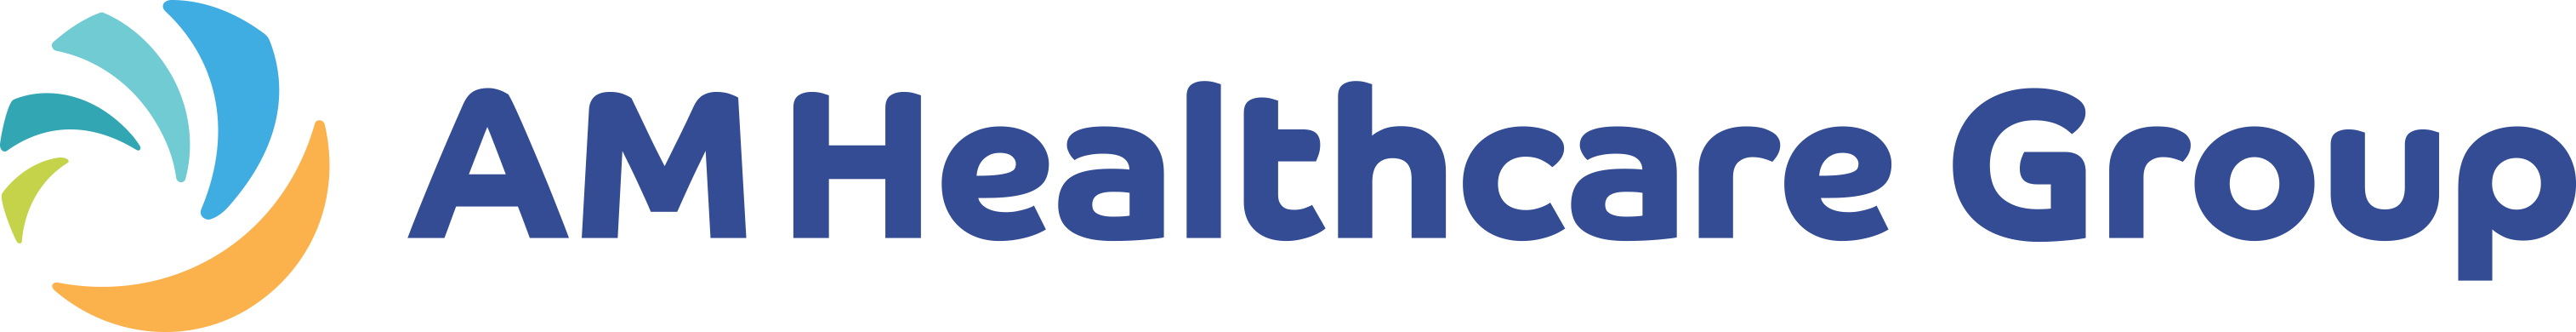 AM Healthcare Group